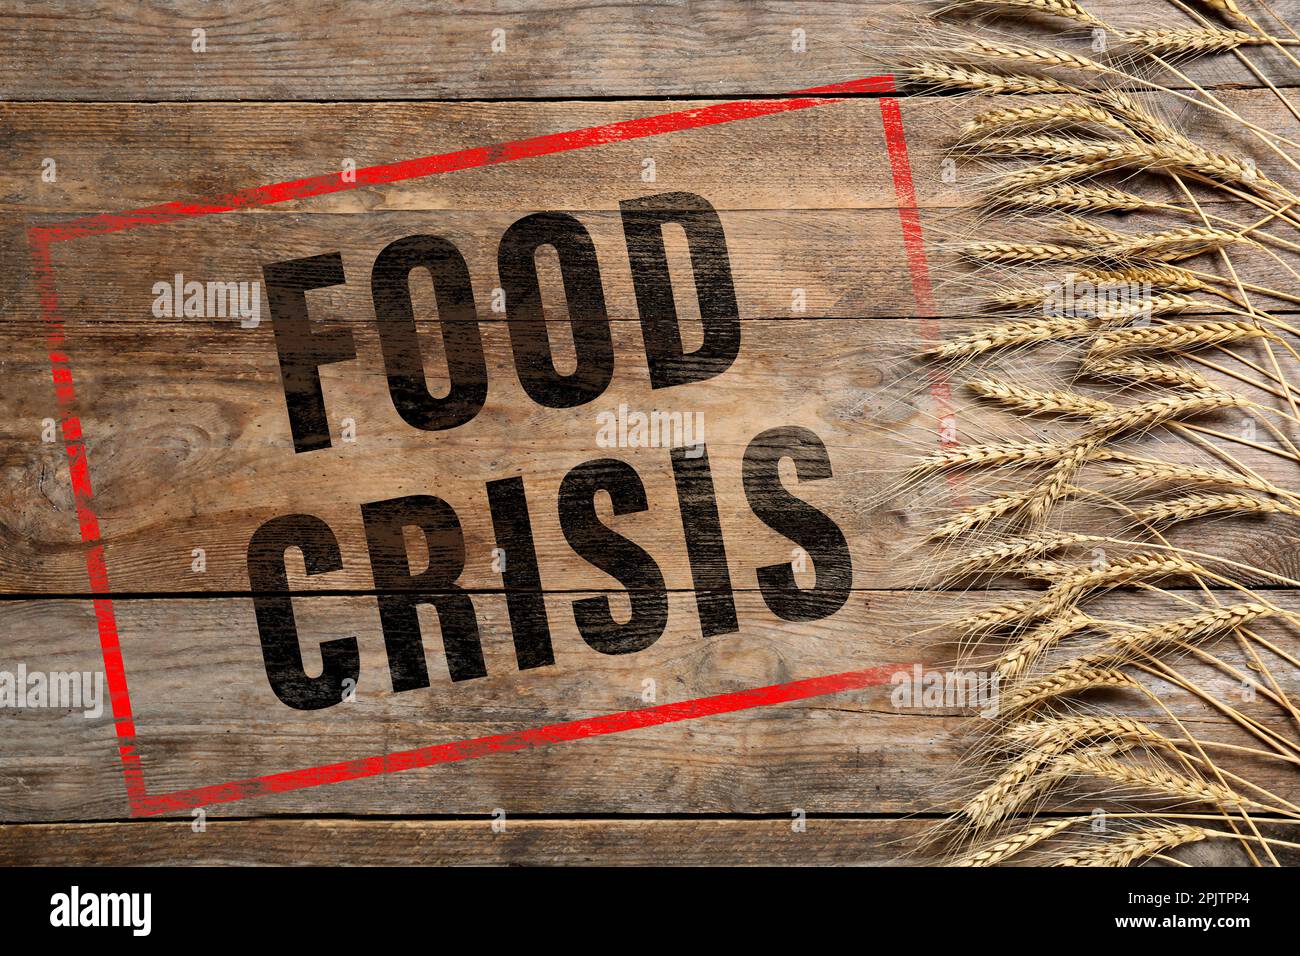 Global food crisis concept. Wheat spikes on wooden background, flat lay Stock Photo